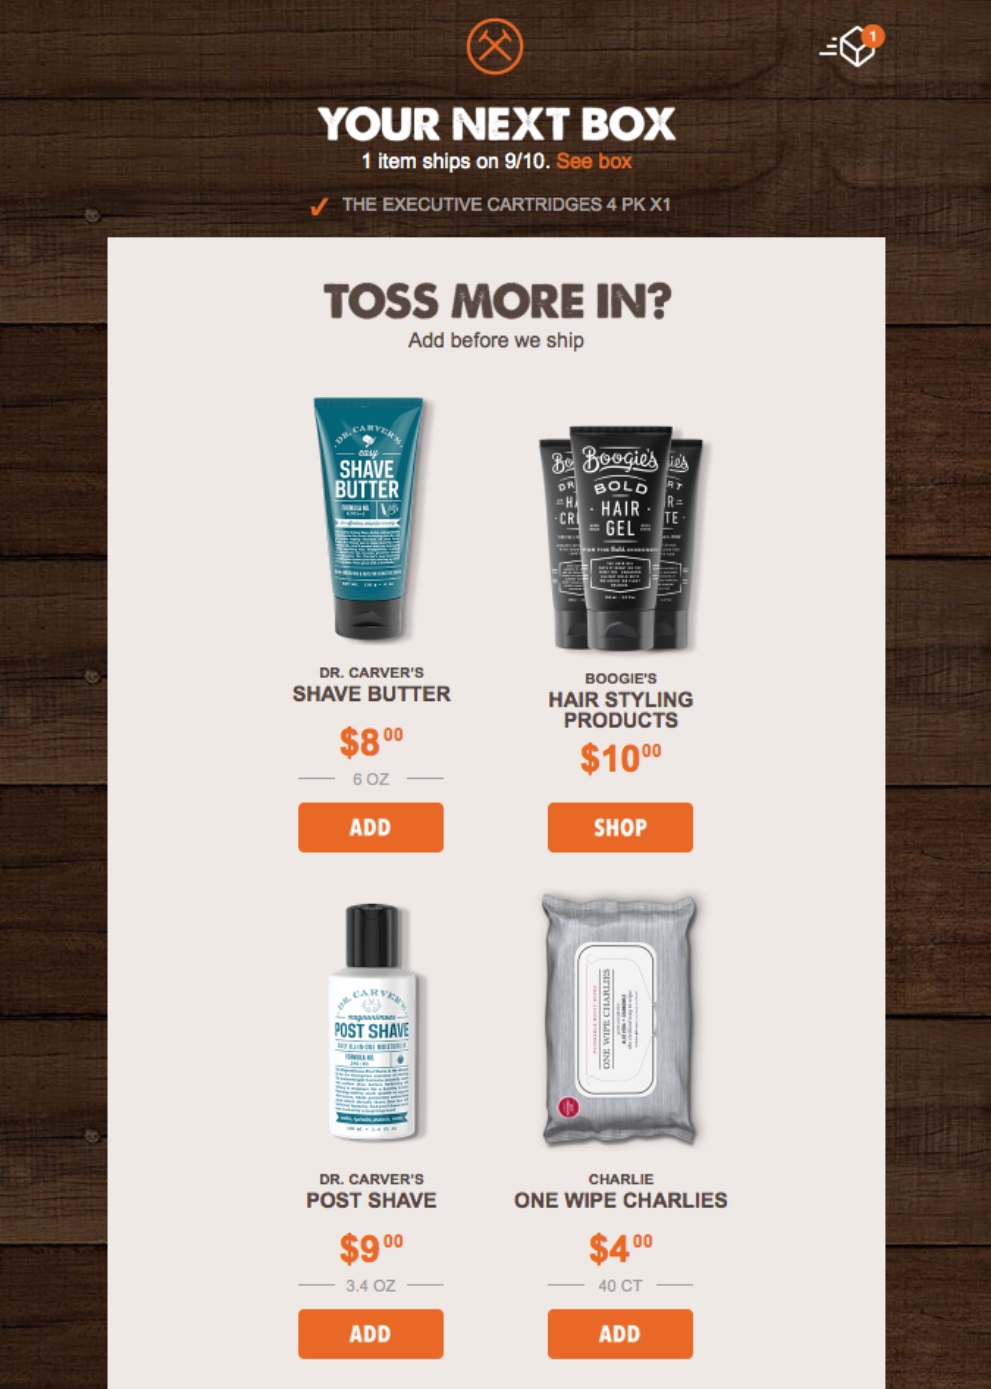 Dollar Shave Club uses a post-purchase upsell to add items to an order before shipping.